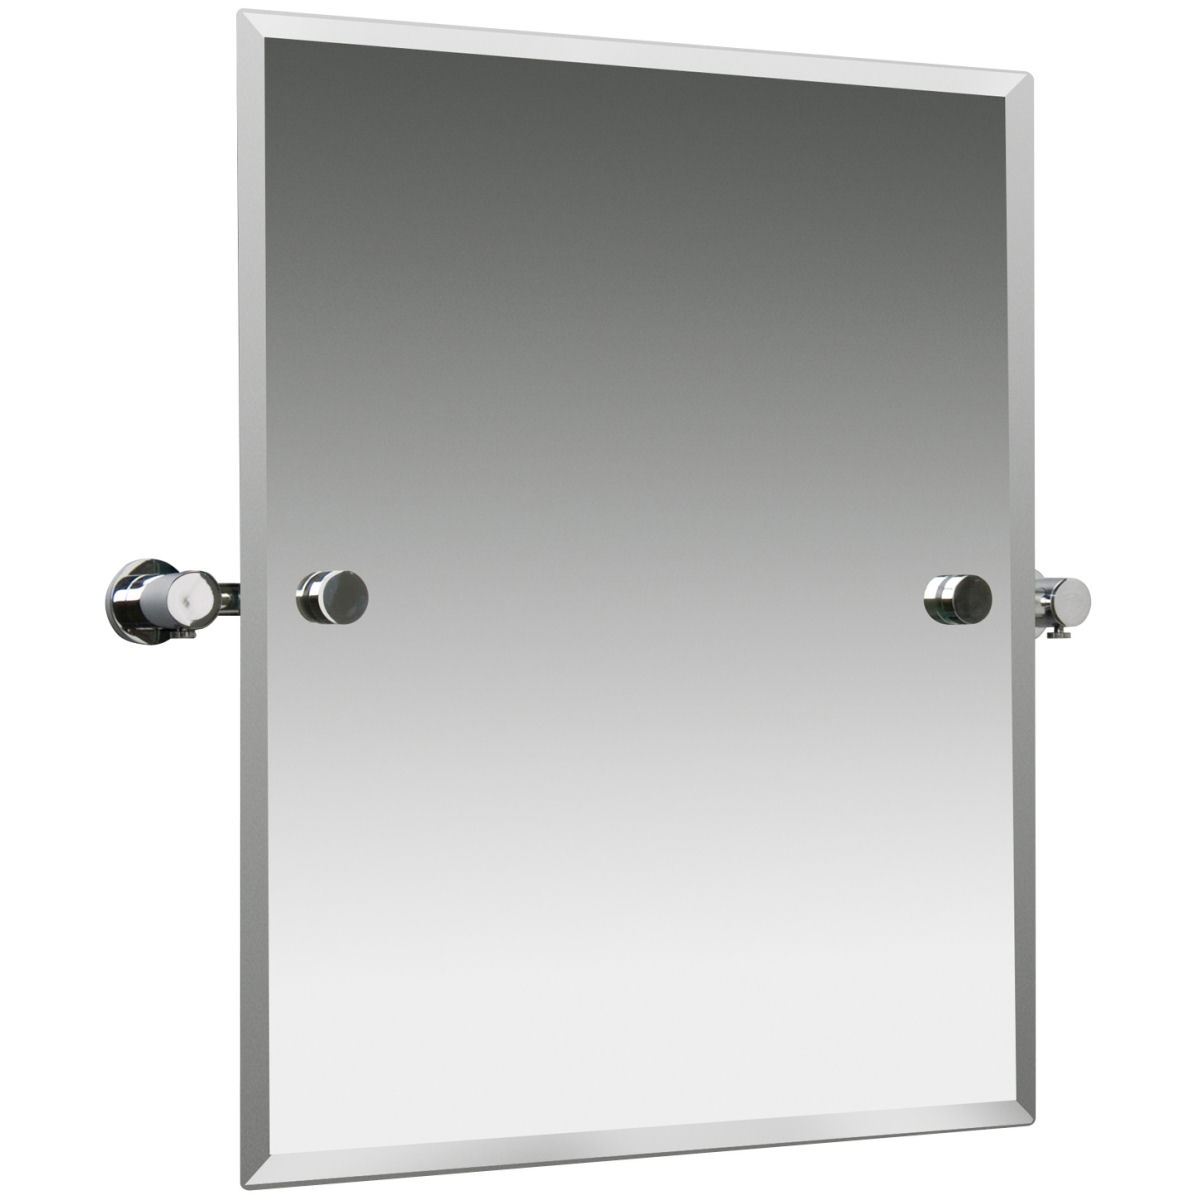 Miller Montana Bathroom Mirror Questions & Answers